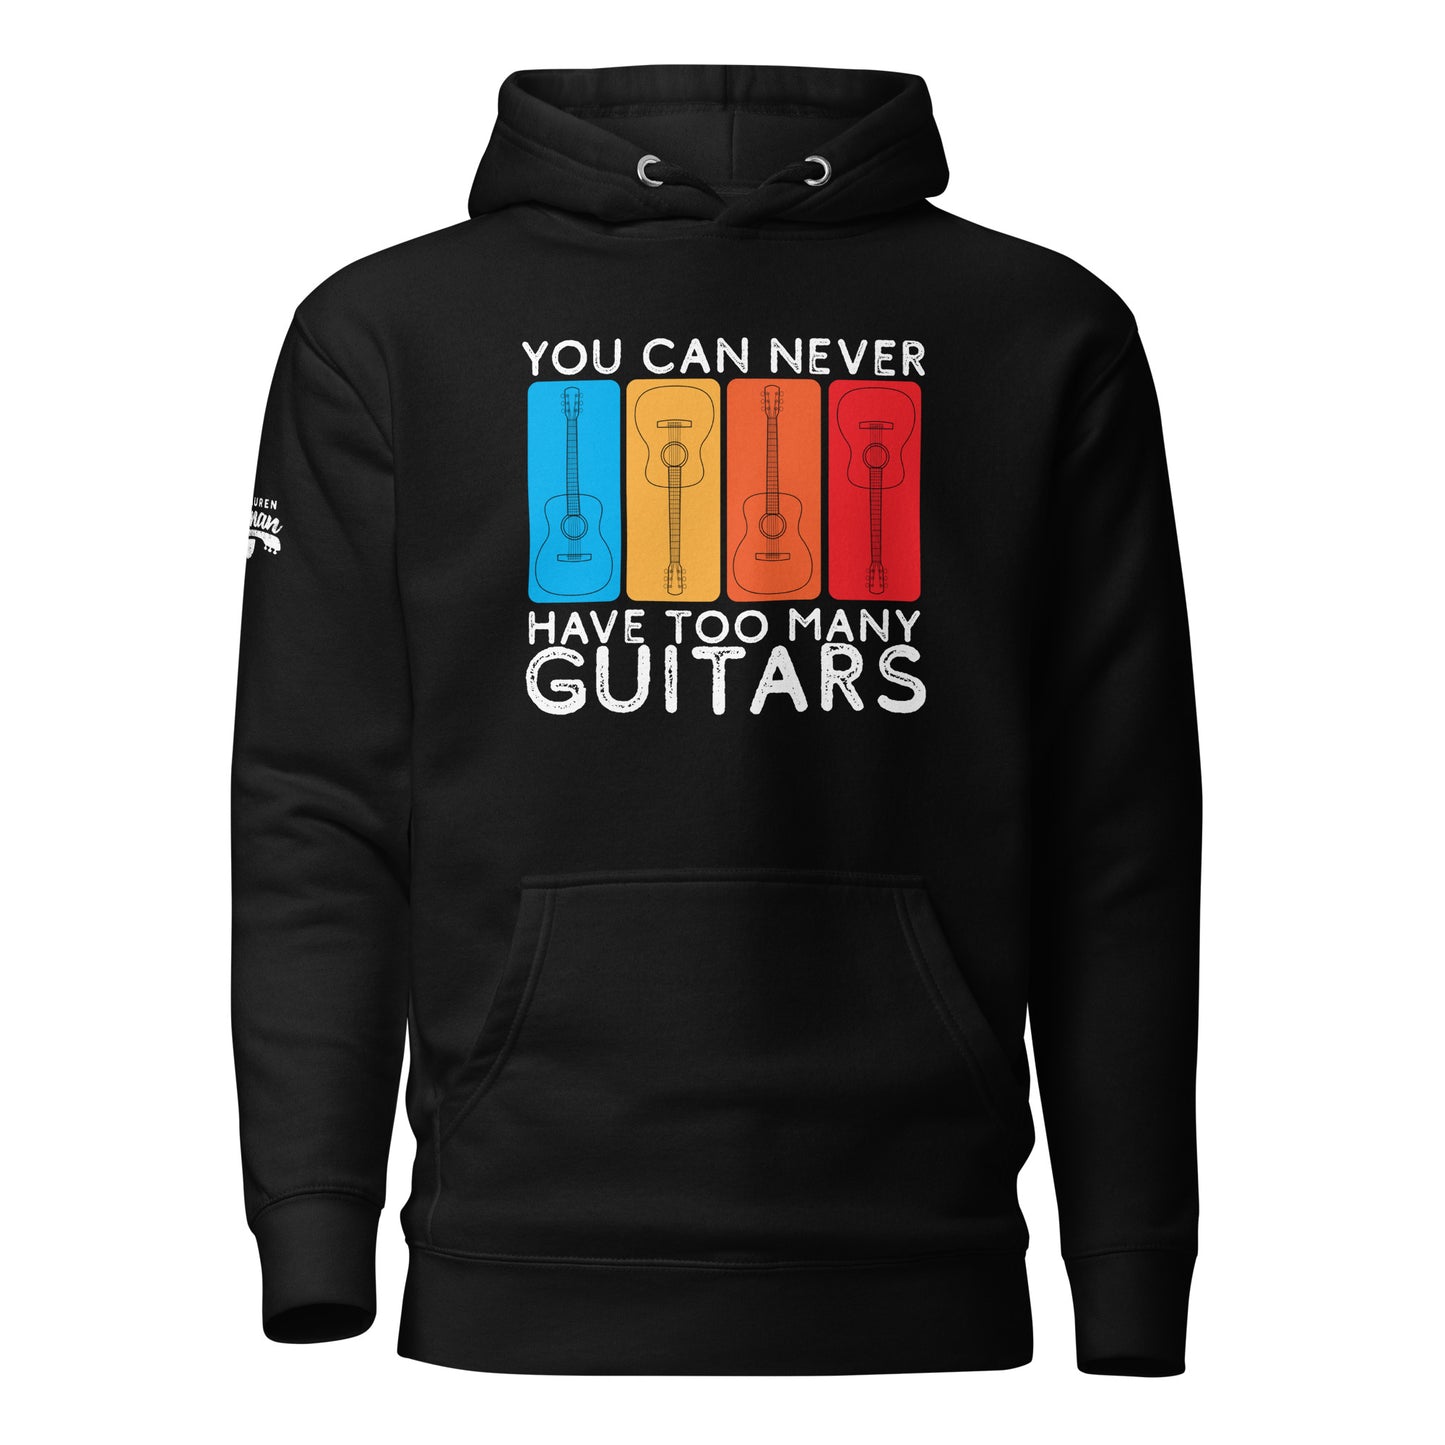 You Can Never Have Too Many Guitars - Unisex Hoodie